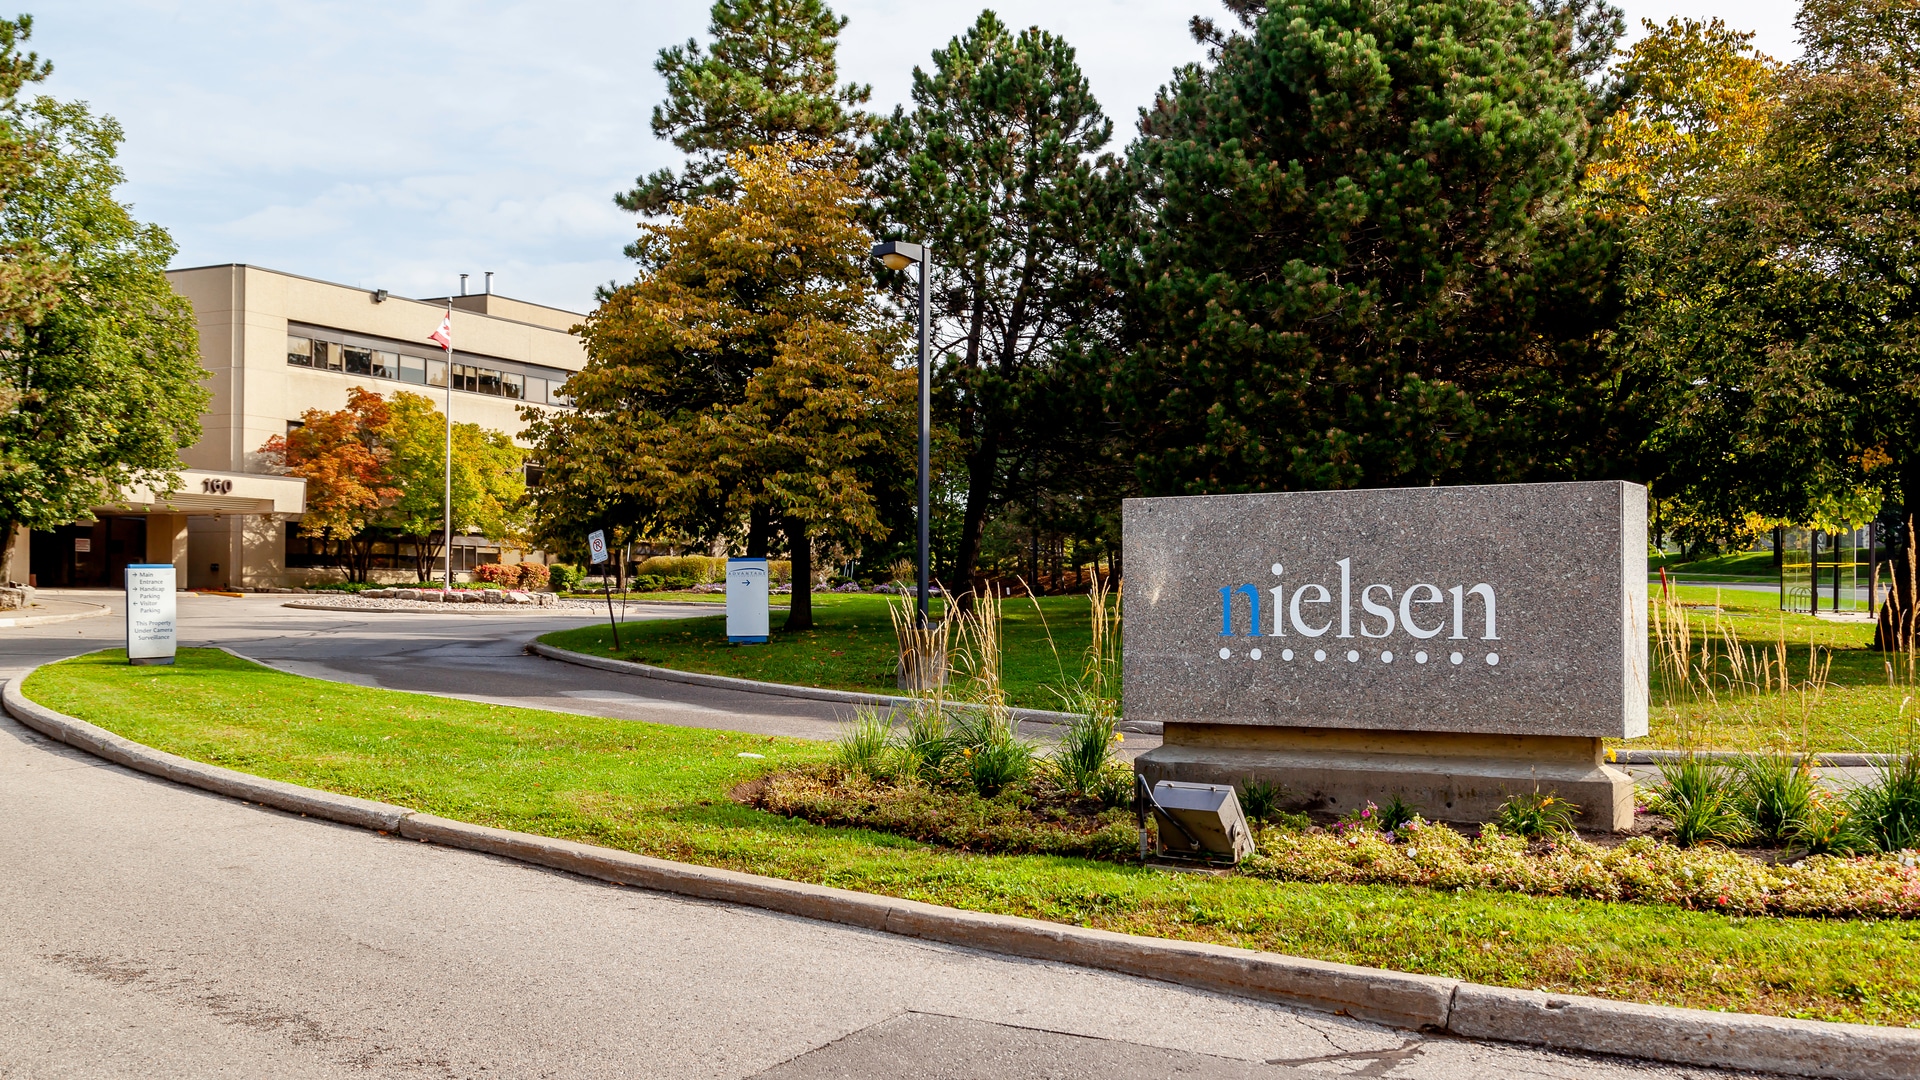 Nielsen to be acquired by private equity consortium